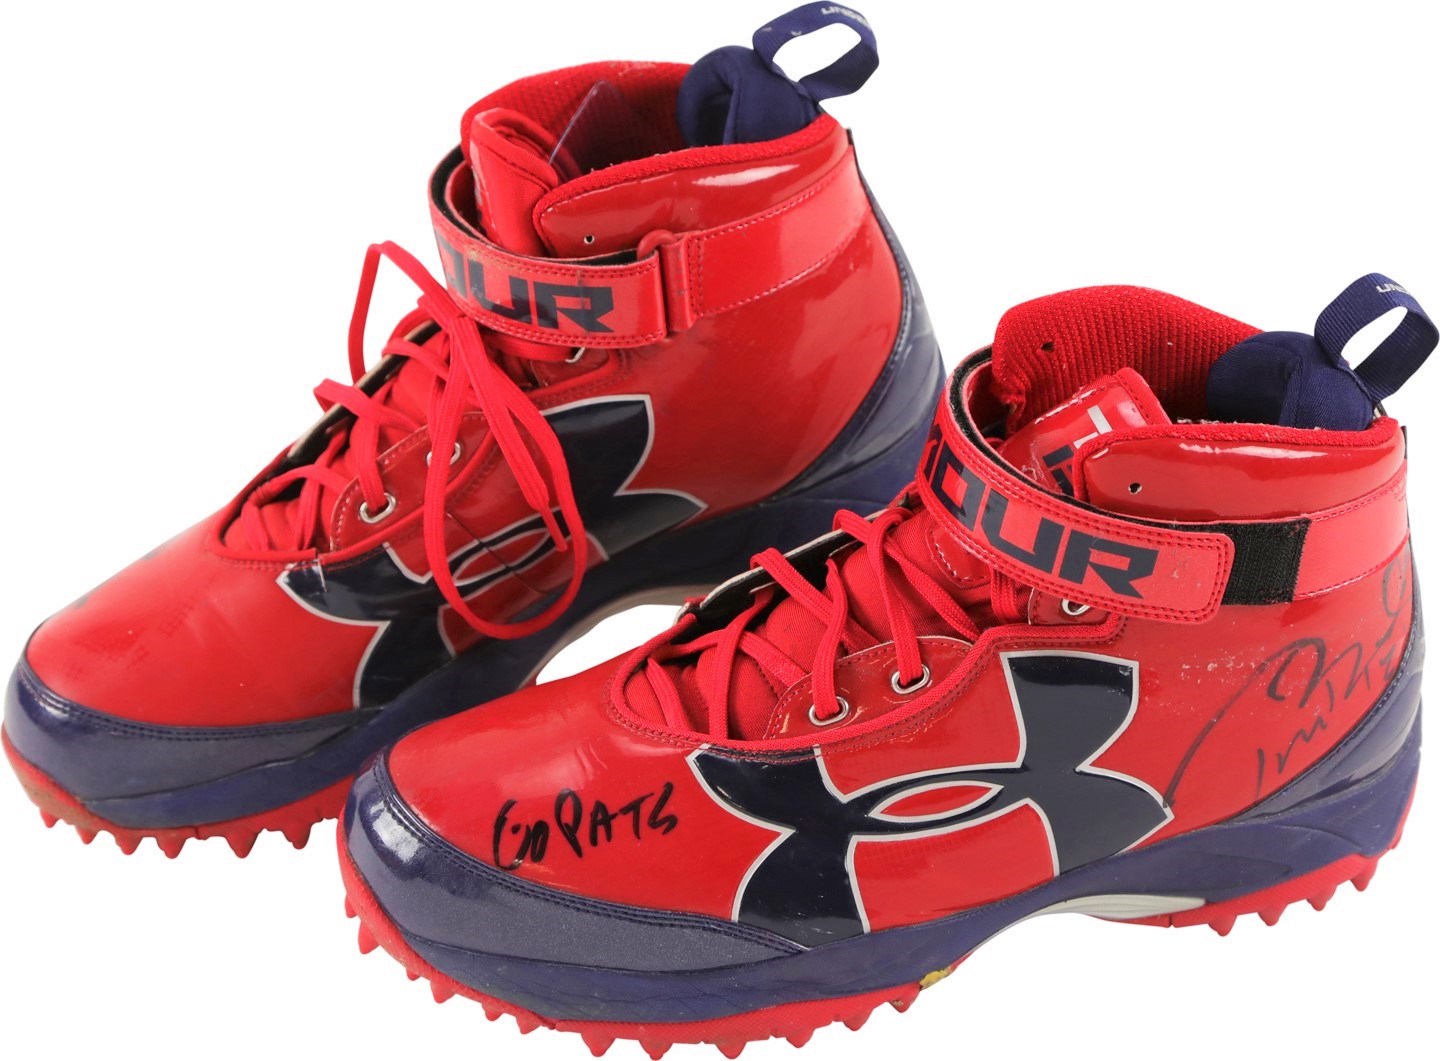 Historic 10/14/18 Tom Brady Photo-Matched "Patriots vs. Chiefs" Signed Game Worn Cleats - The FIRST Brady vs. Mahomes Matchup! (Gifted to Devin & Jason McCourty)